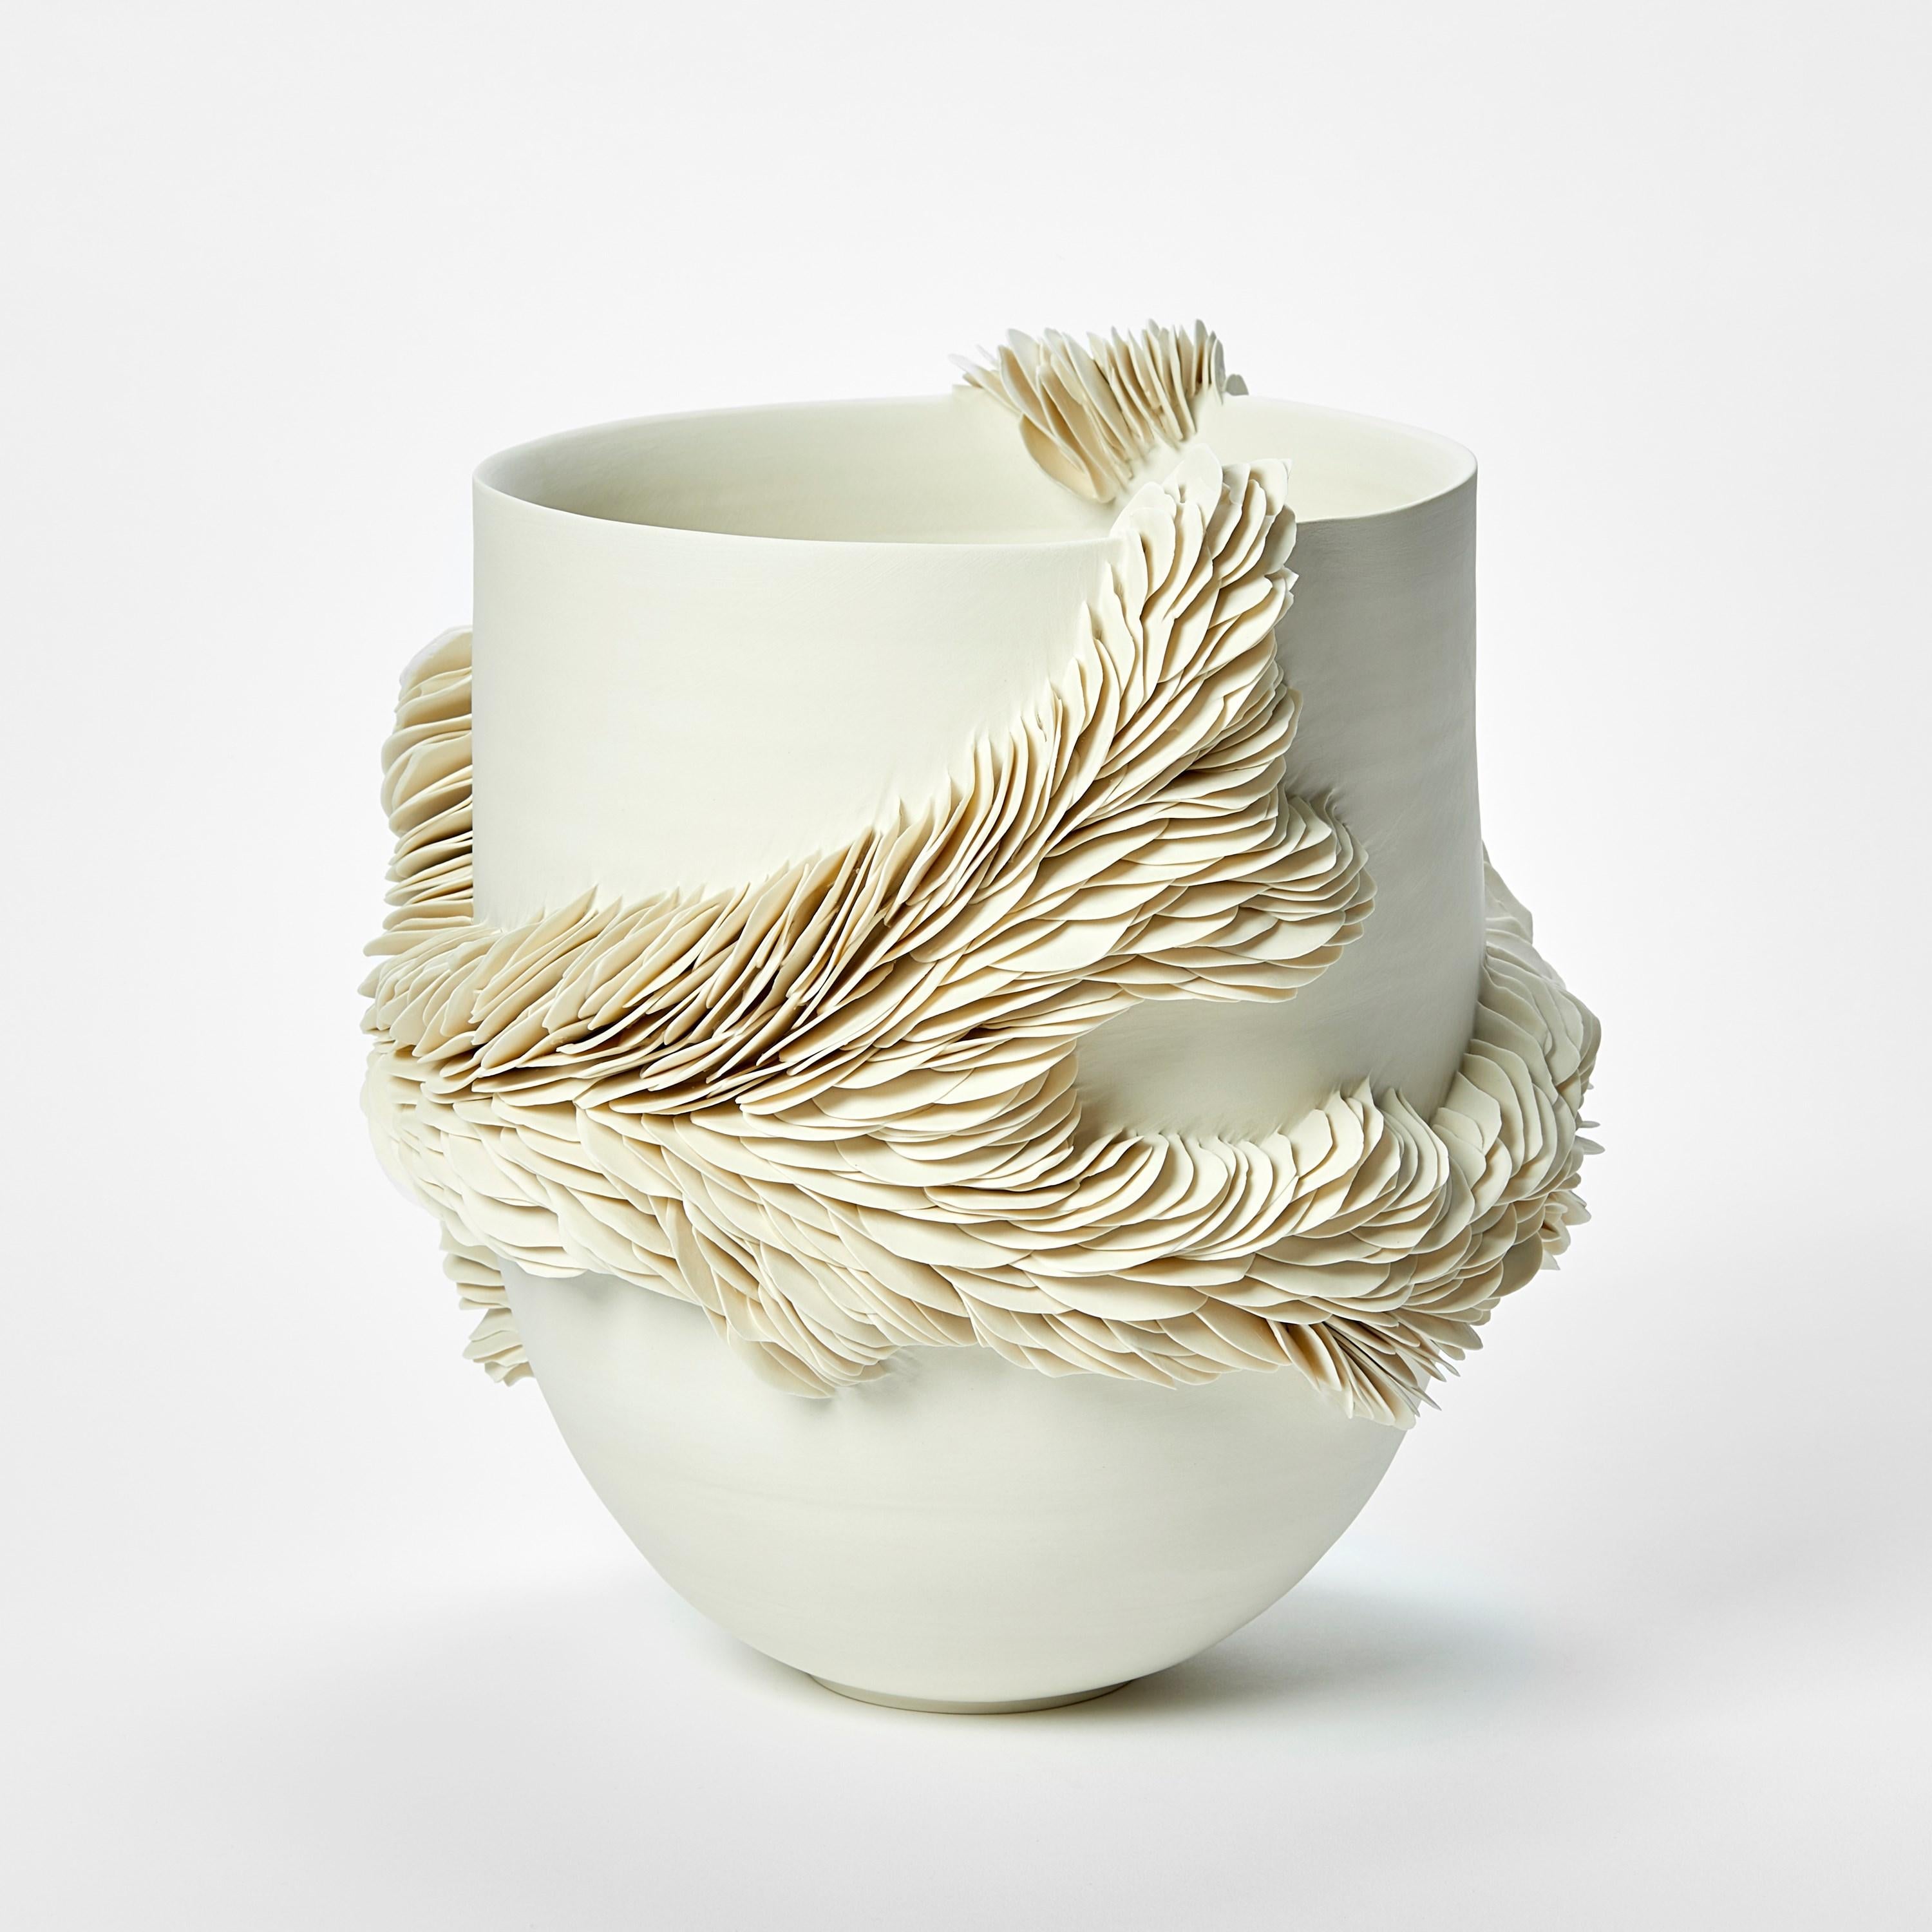 Organic Modern White Tall Wrapping Bowl I, a porcelain shard textured bowl by Olivia Walker